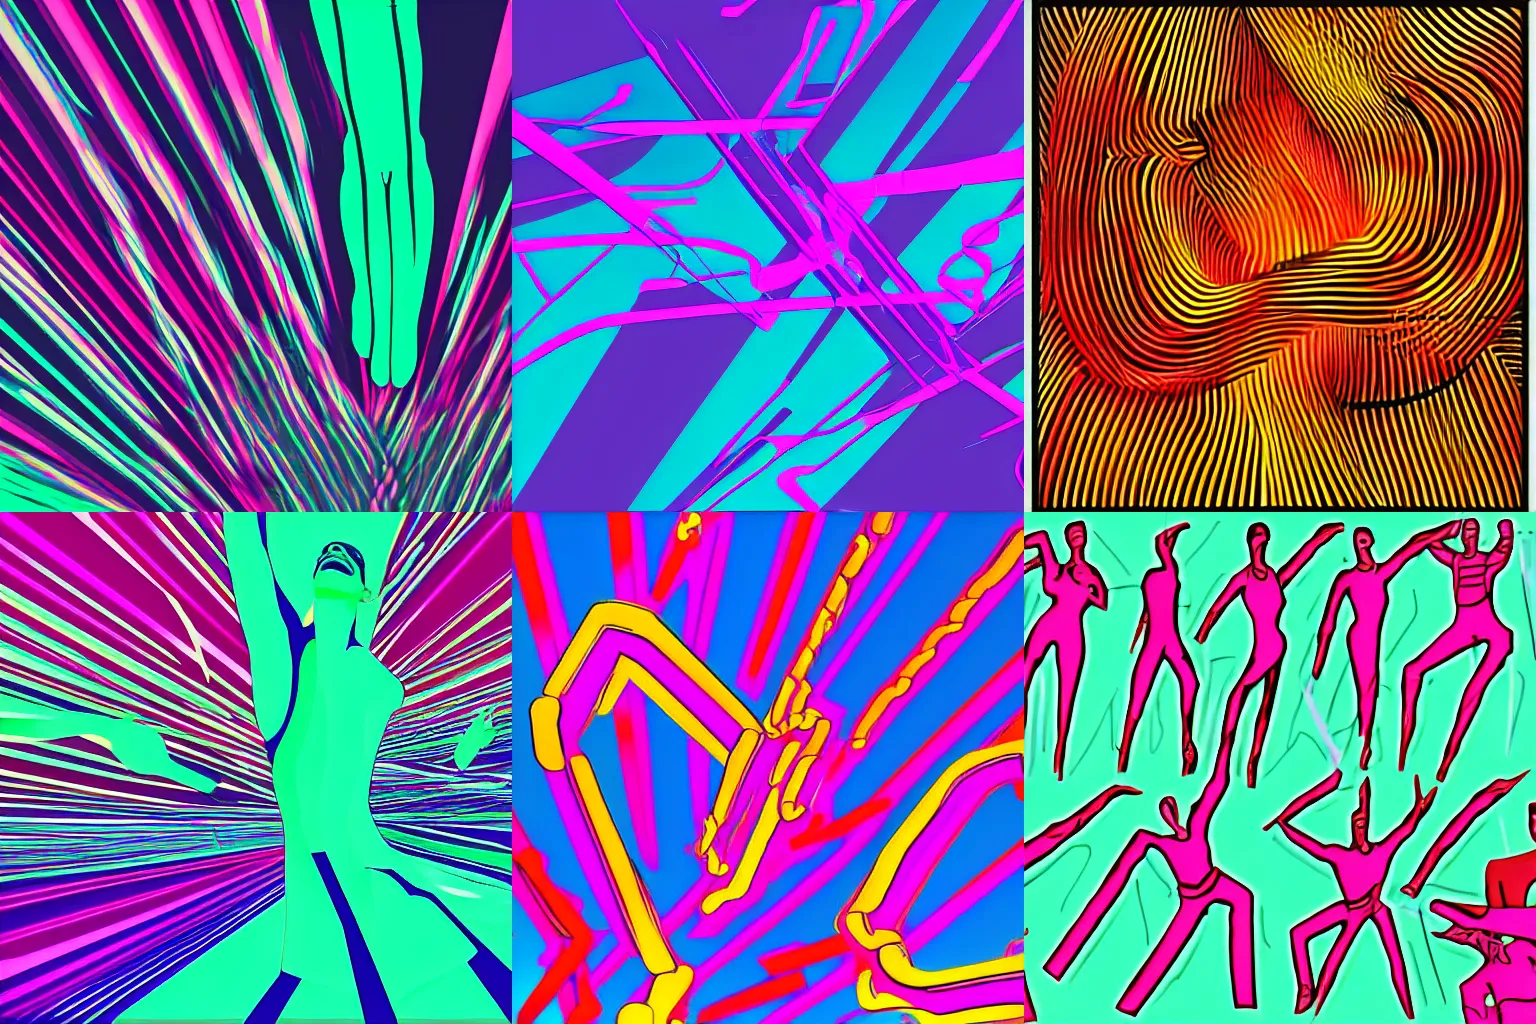 Prompt: synthwave generative art of lines forming the bodies of dancing people in the style of Ad Reinhart